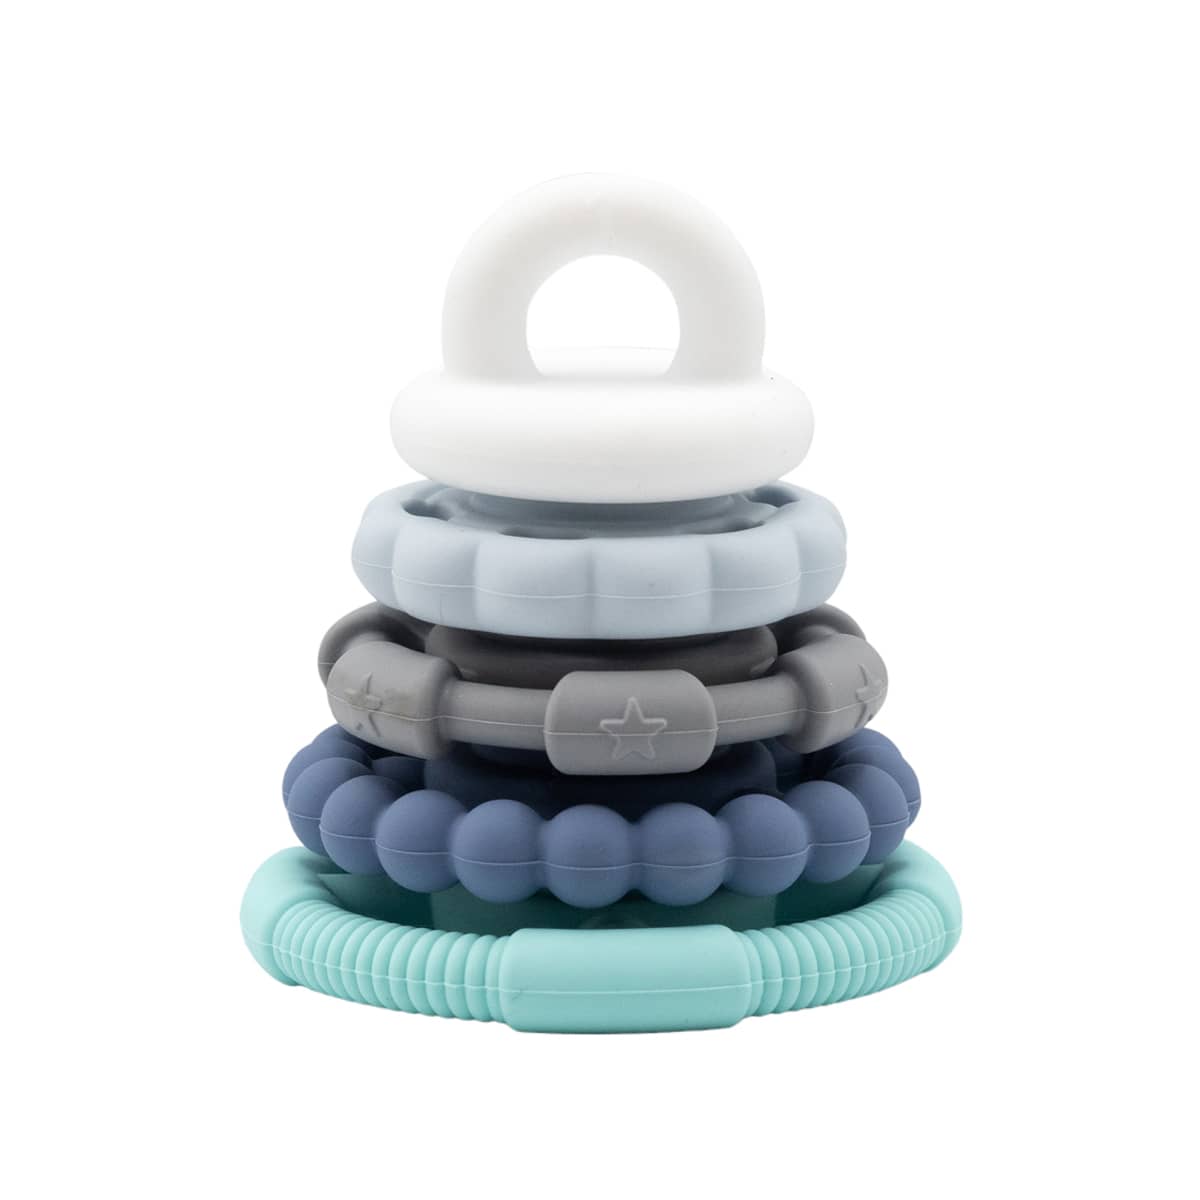 Jellystone Designs Rainbow Stacker Teether and Toy - Ocean